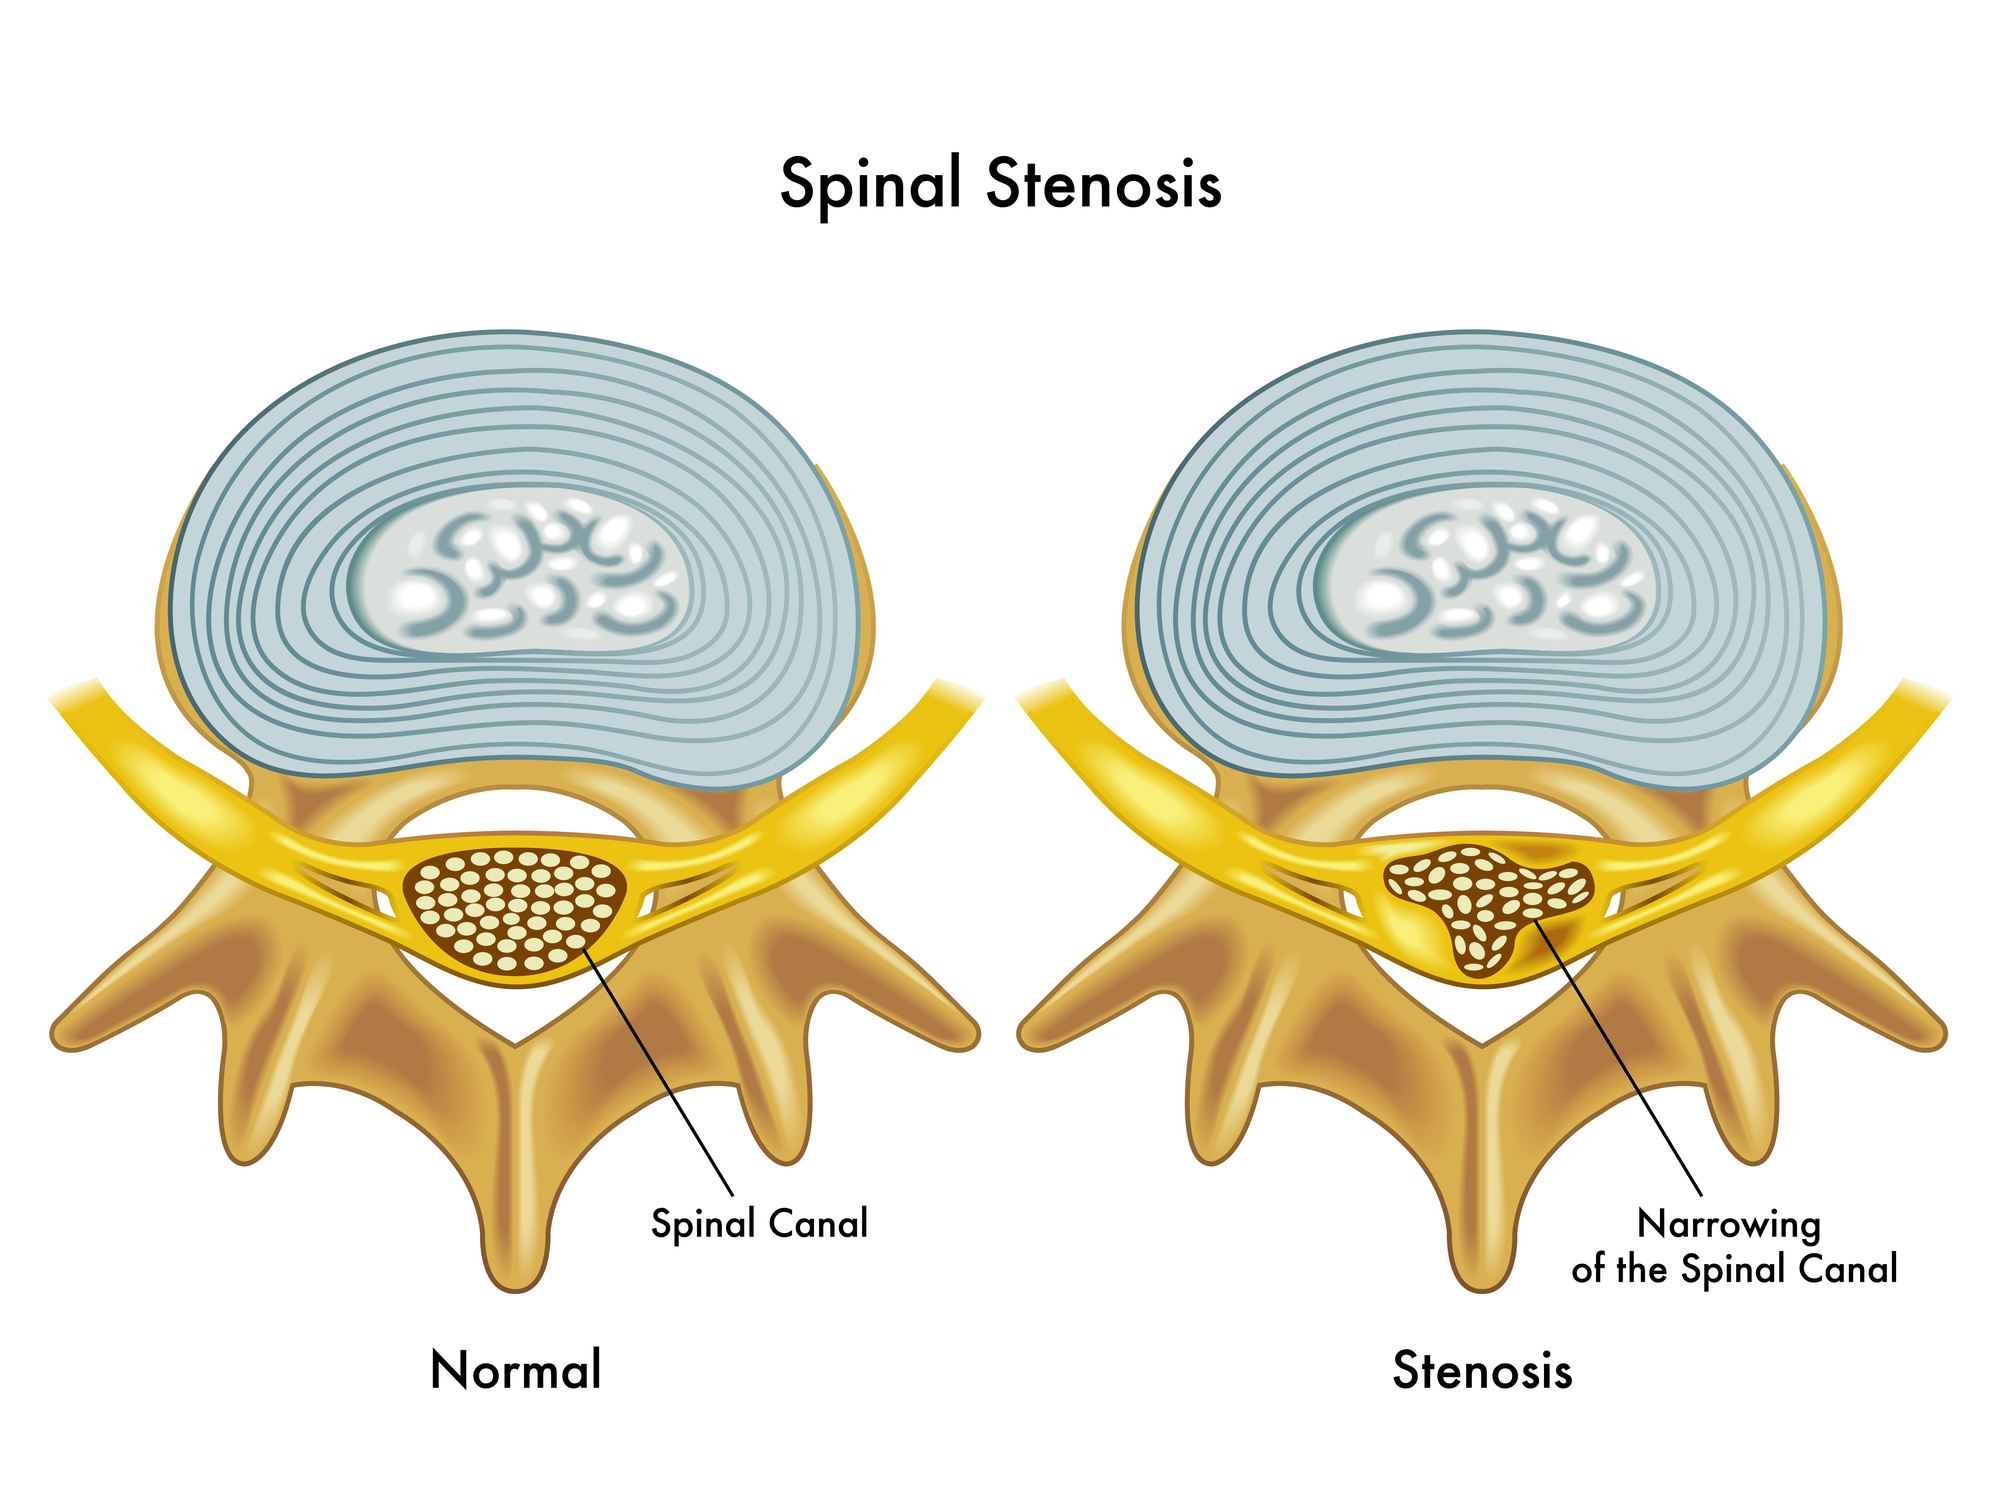 Dr. Ed Becker breaks down the frequently asked question: What is Spinal Stenosis?